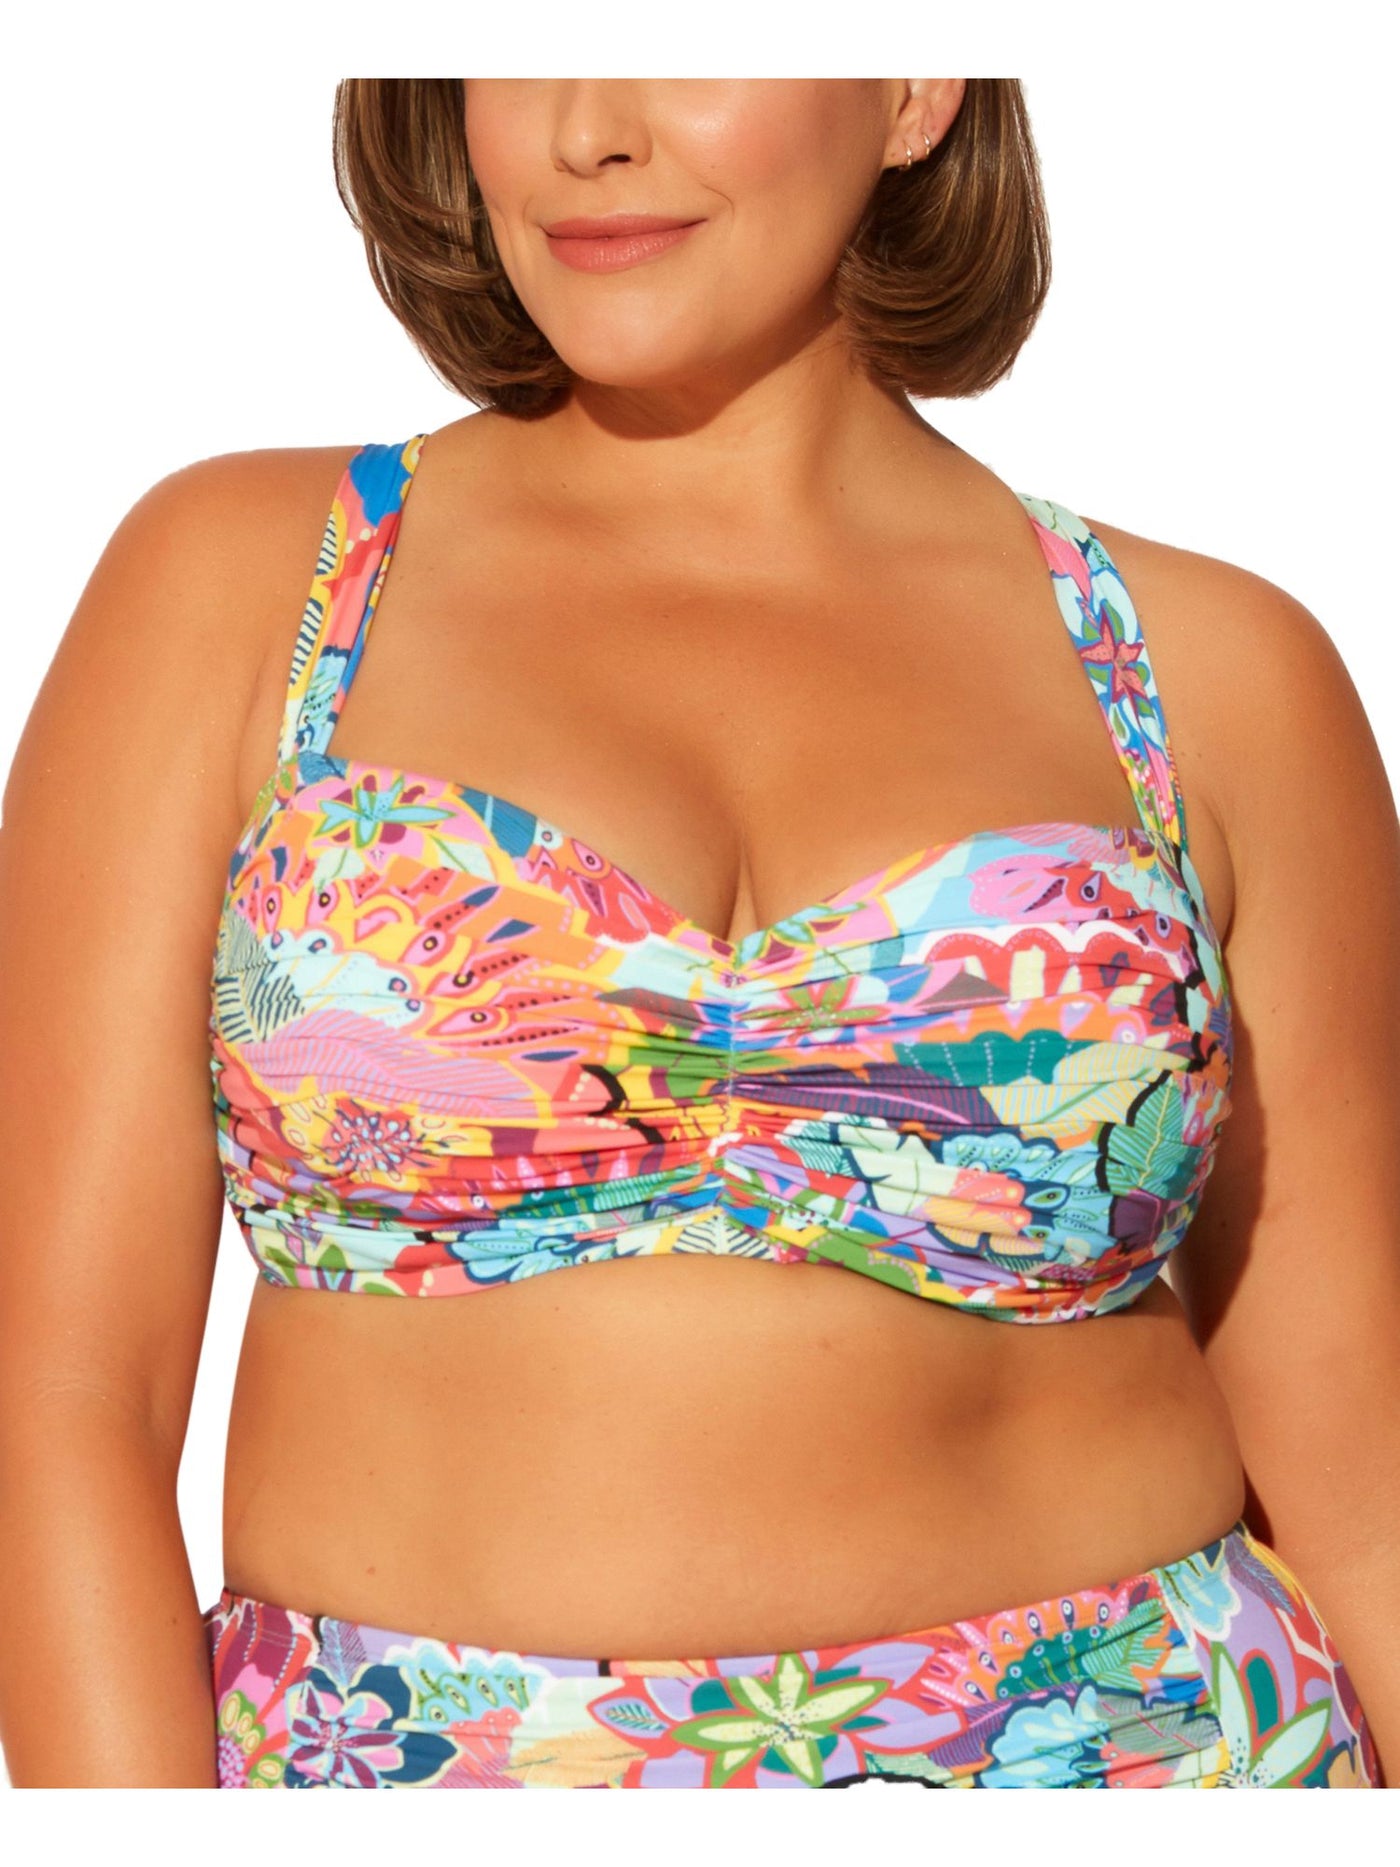 BLEU Women's Multi Color Printed Sweetheart Ruched Stretch Adjustable Underwire Swimsuit Top 20W